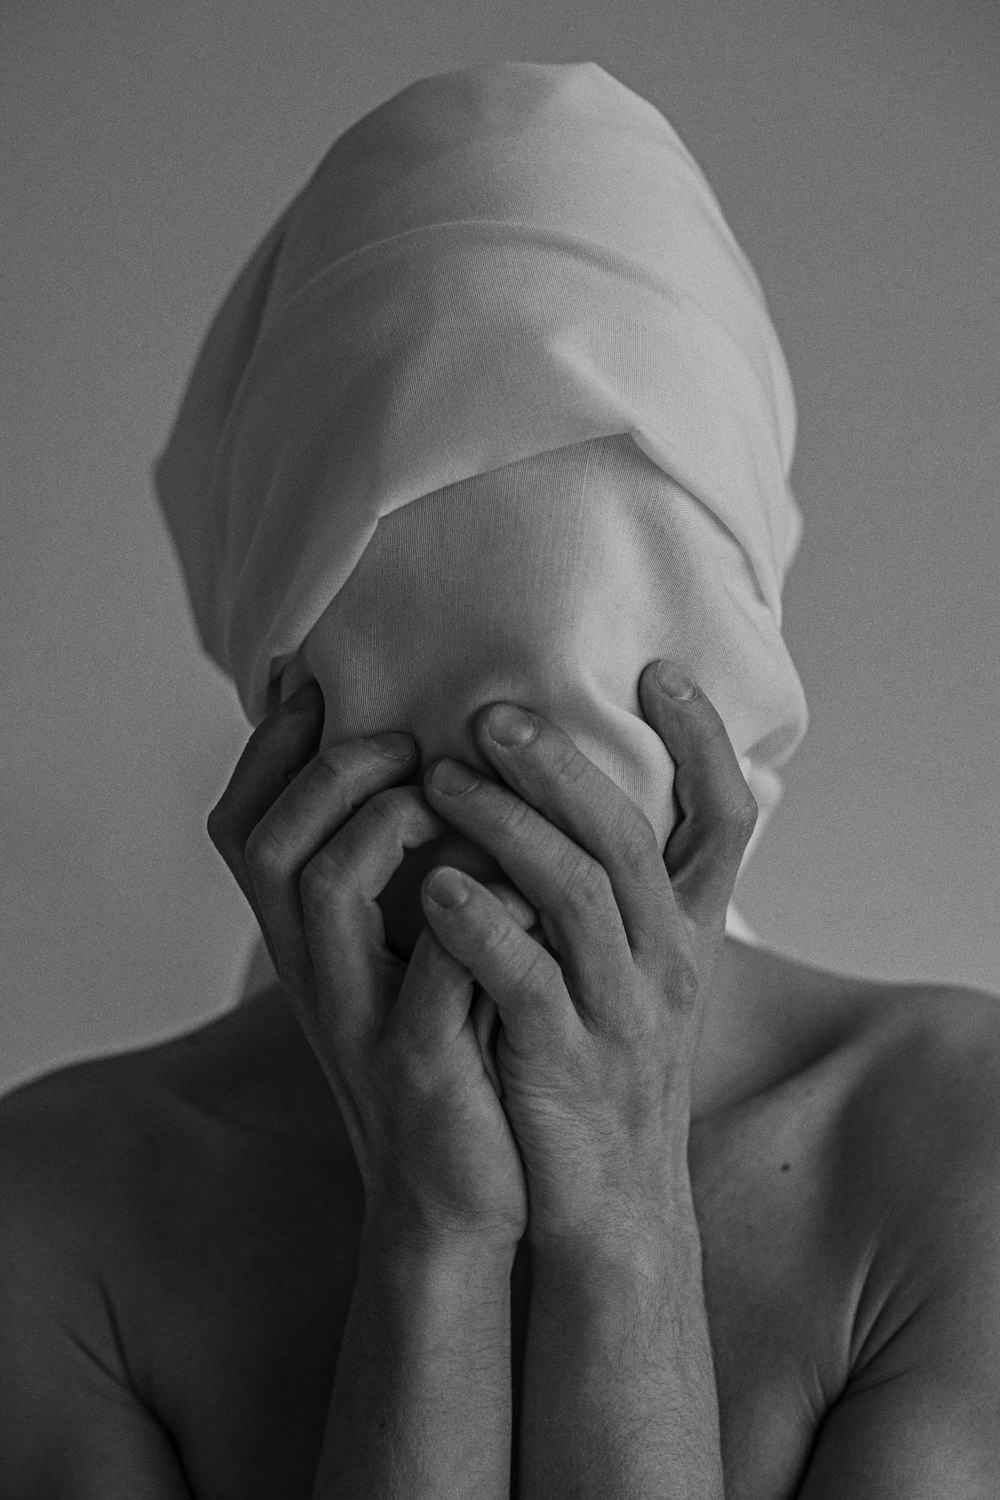 a shirtless woman covering her face with her hands